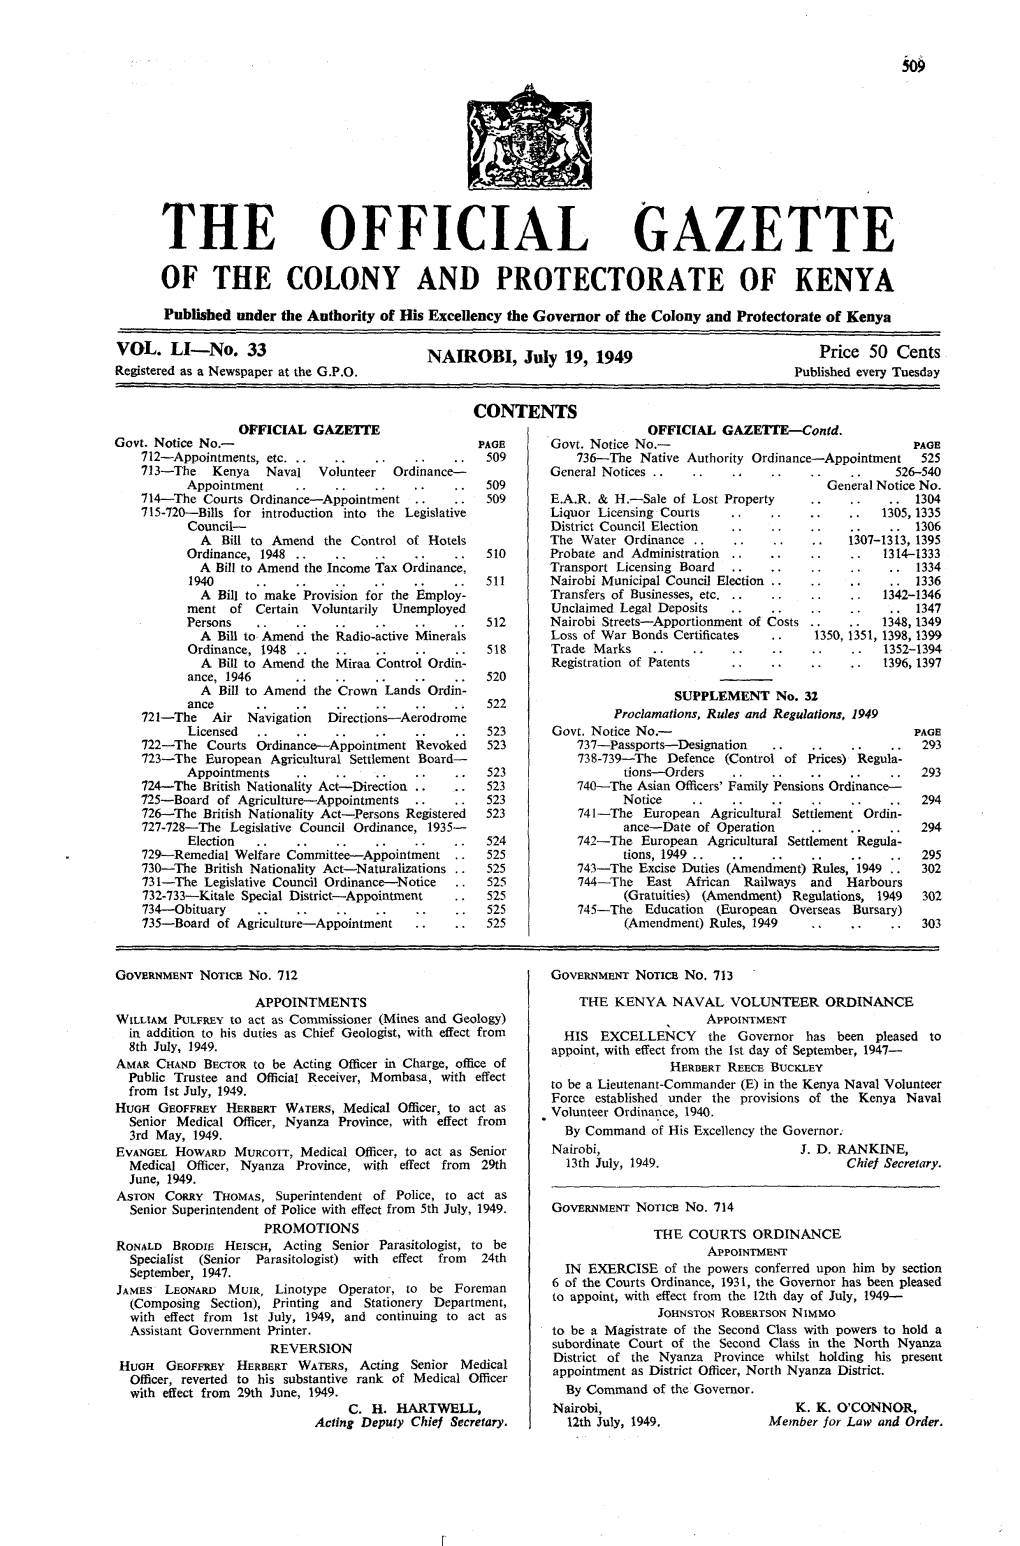 THE OFFICIAL GAZETTE of the COLONY and PROTECTORATE of KENYA Published Under the Authority of His Excellency the Governor of the Colony and Protectorate of Kenya